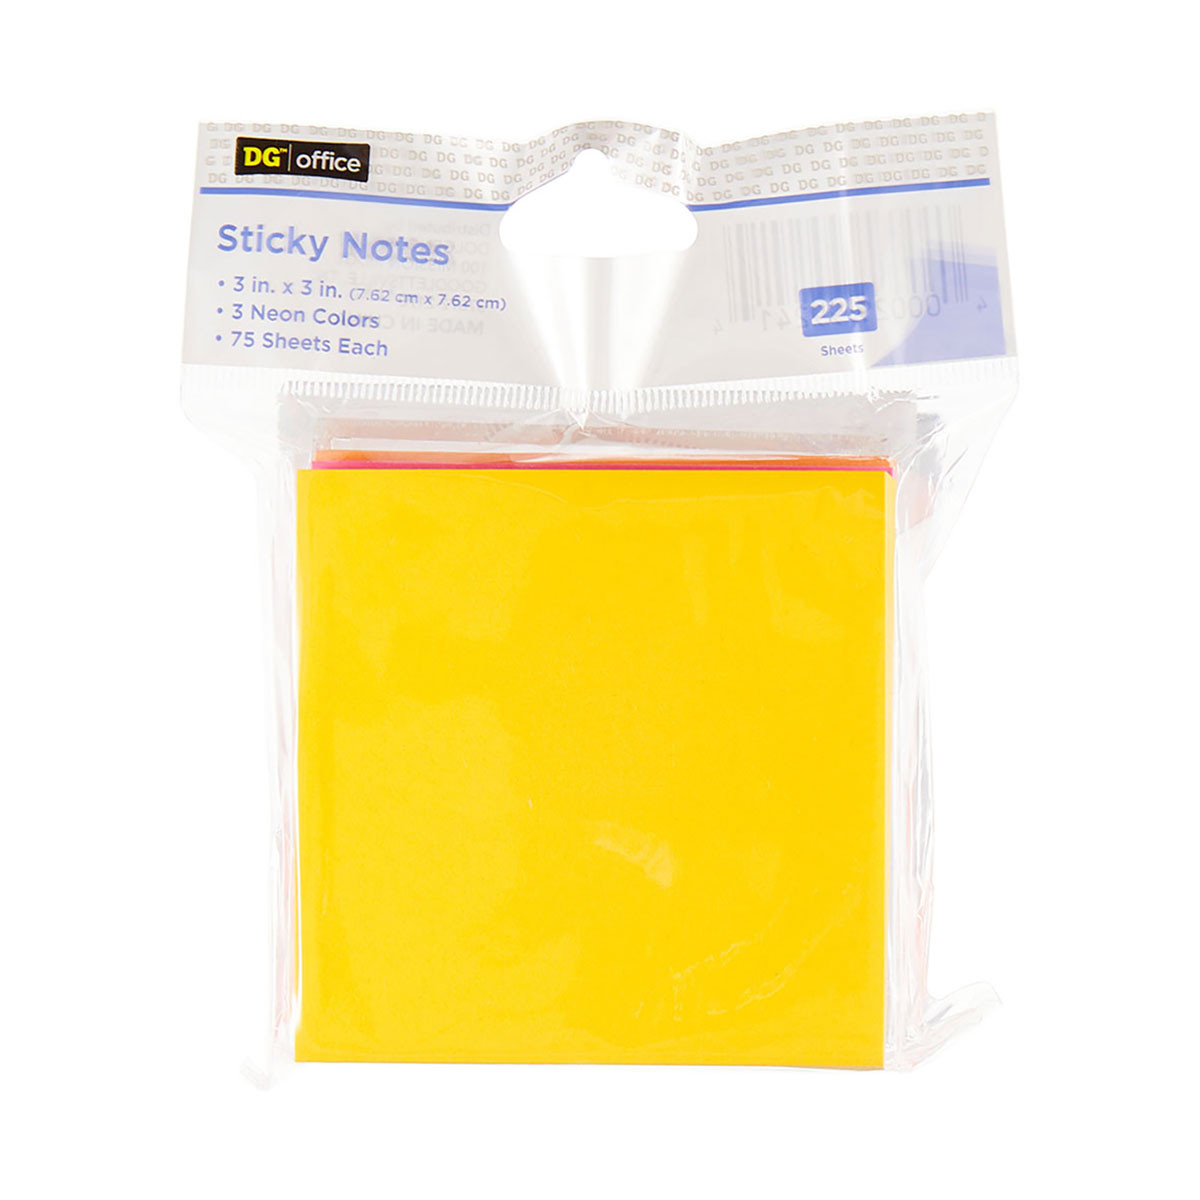 Sticky Notes, 3x3 in.